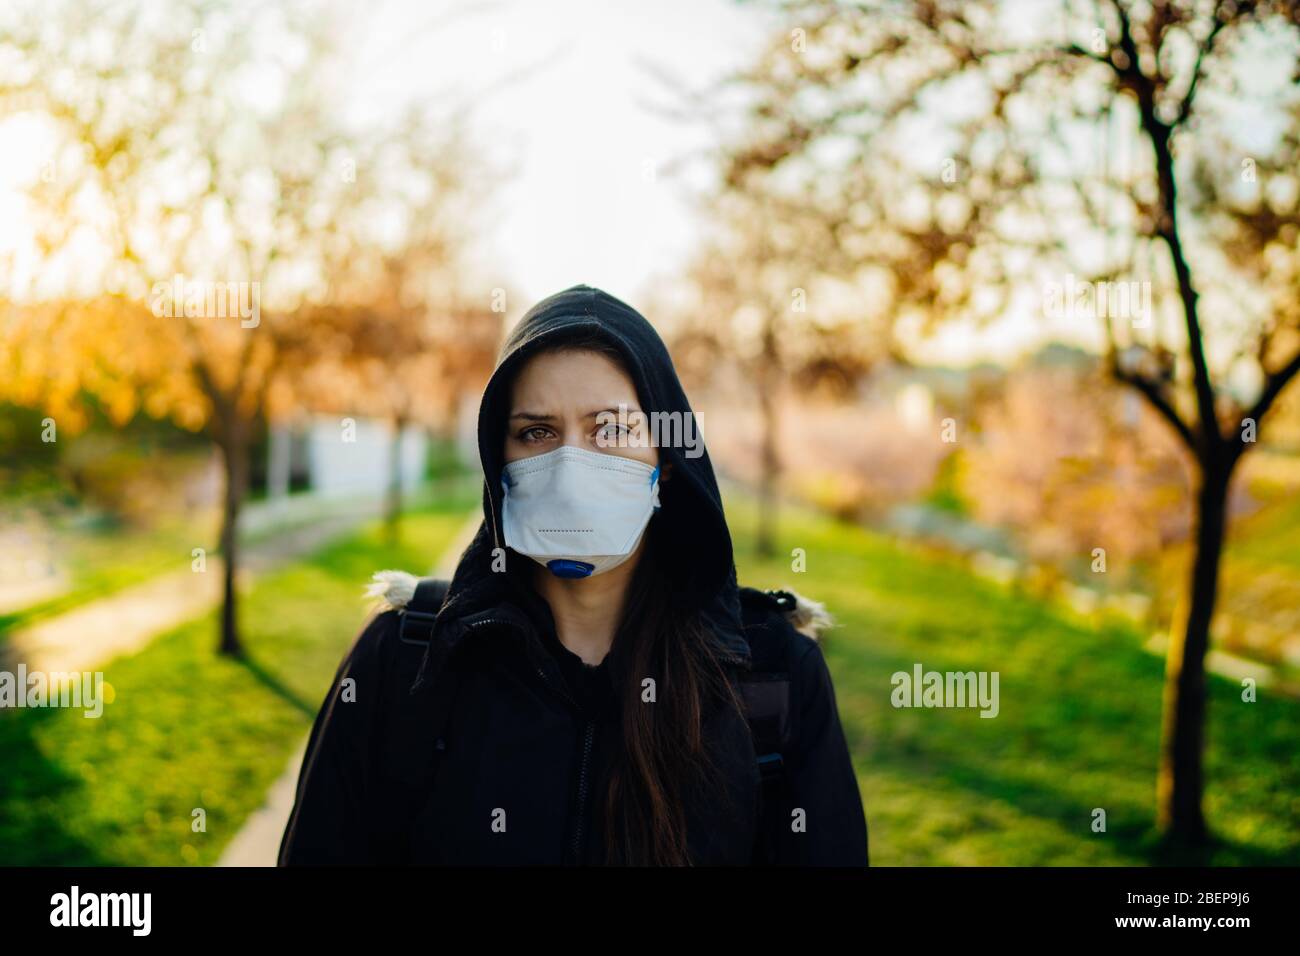 Depressed scared person wearing a N95 mask to prevent contracting disease in spring nature.Coronavirus pandemic life.Infection panic and fear.Emotiona Stock Photo